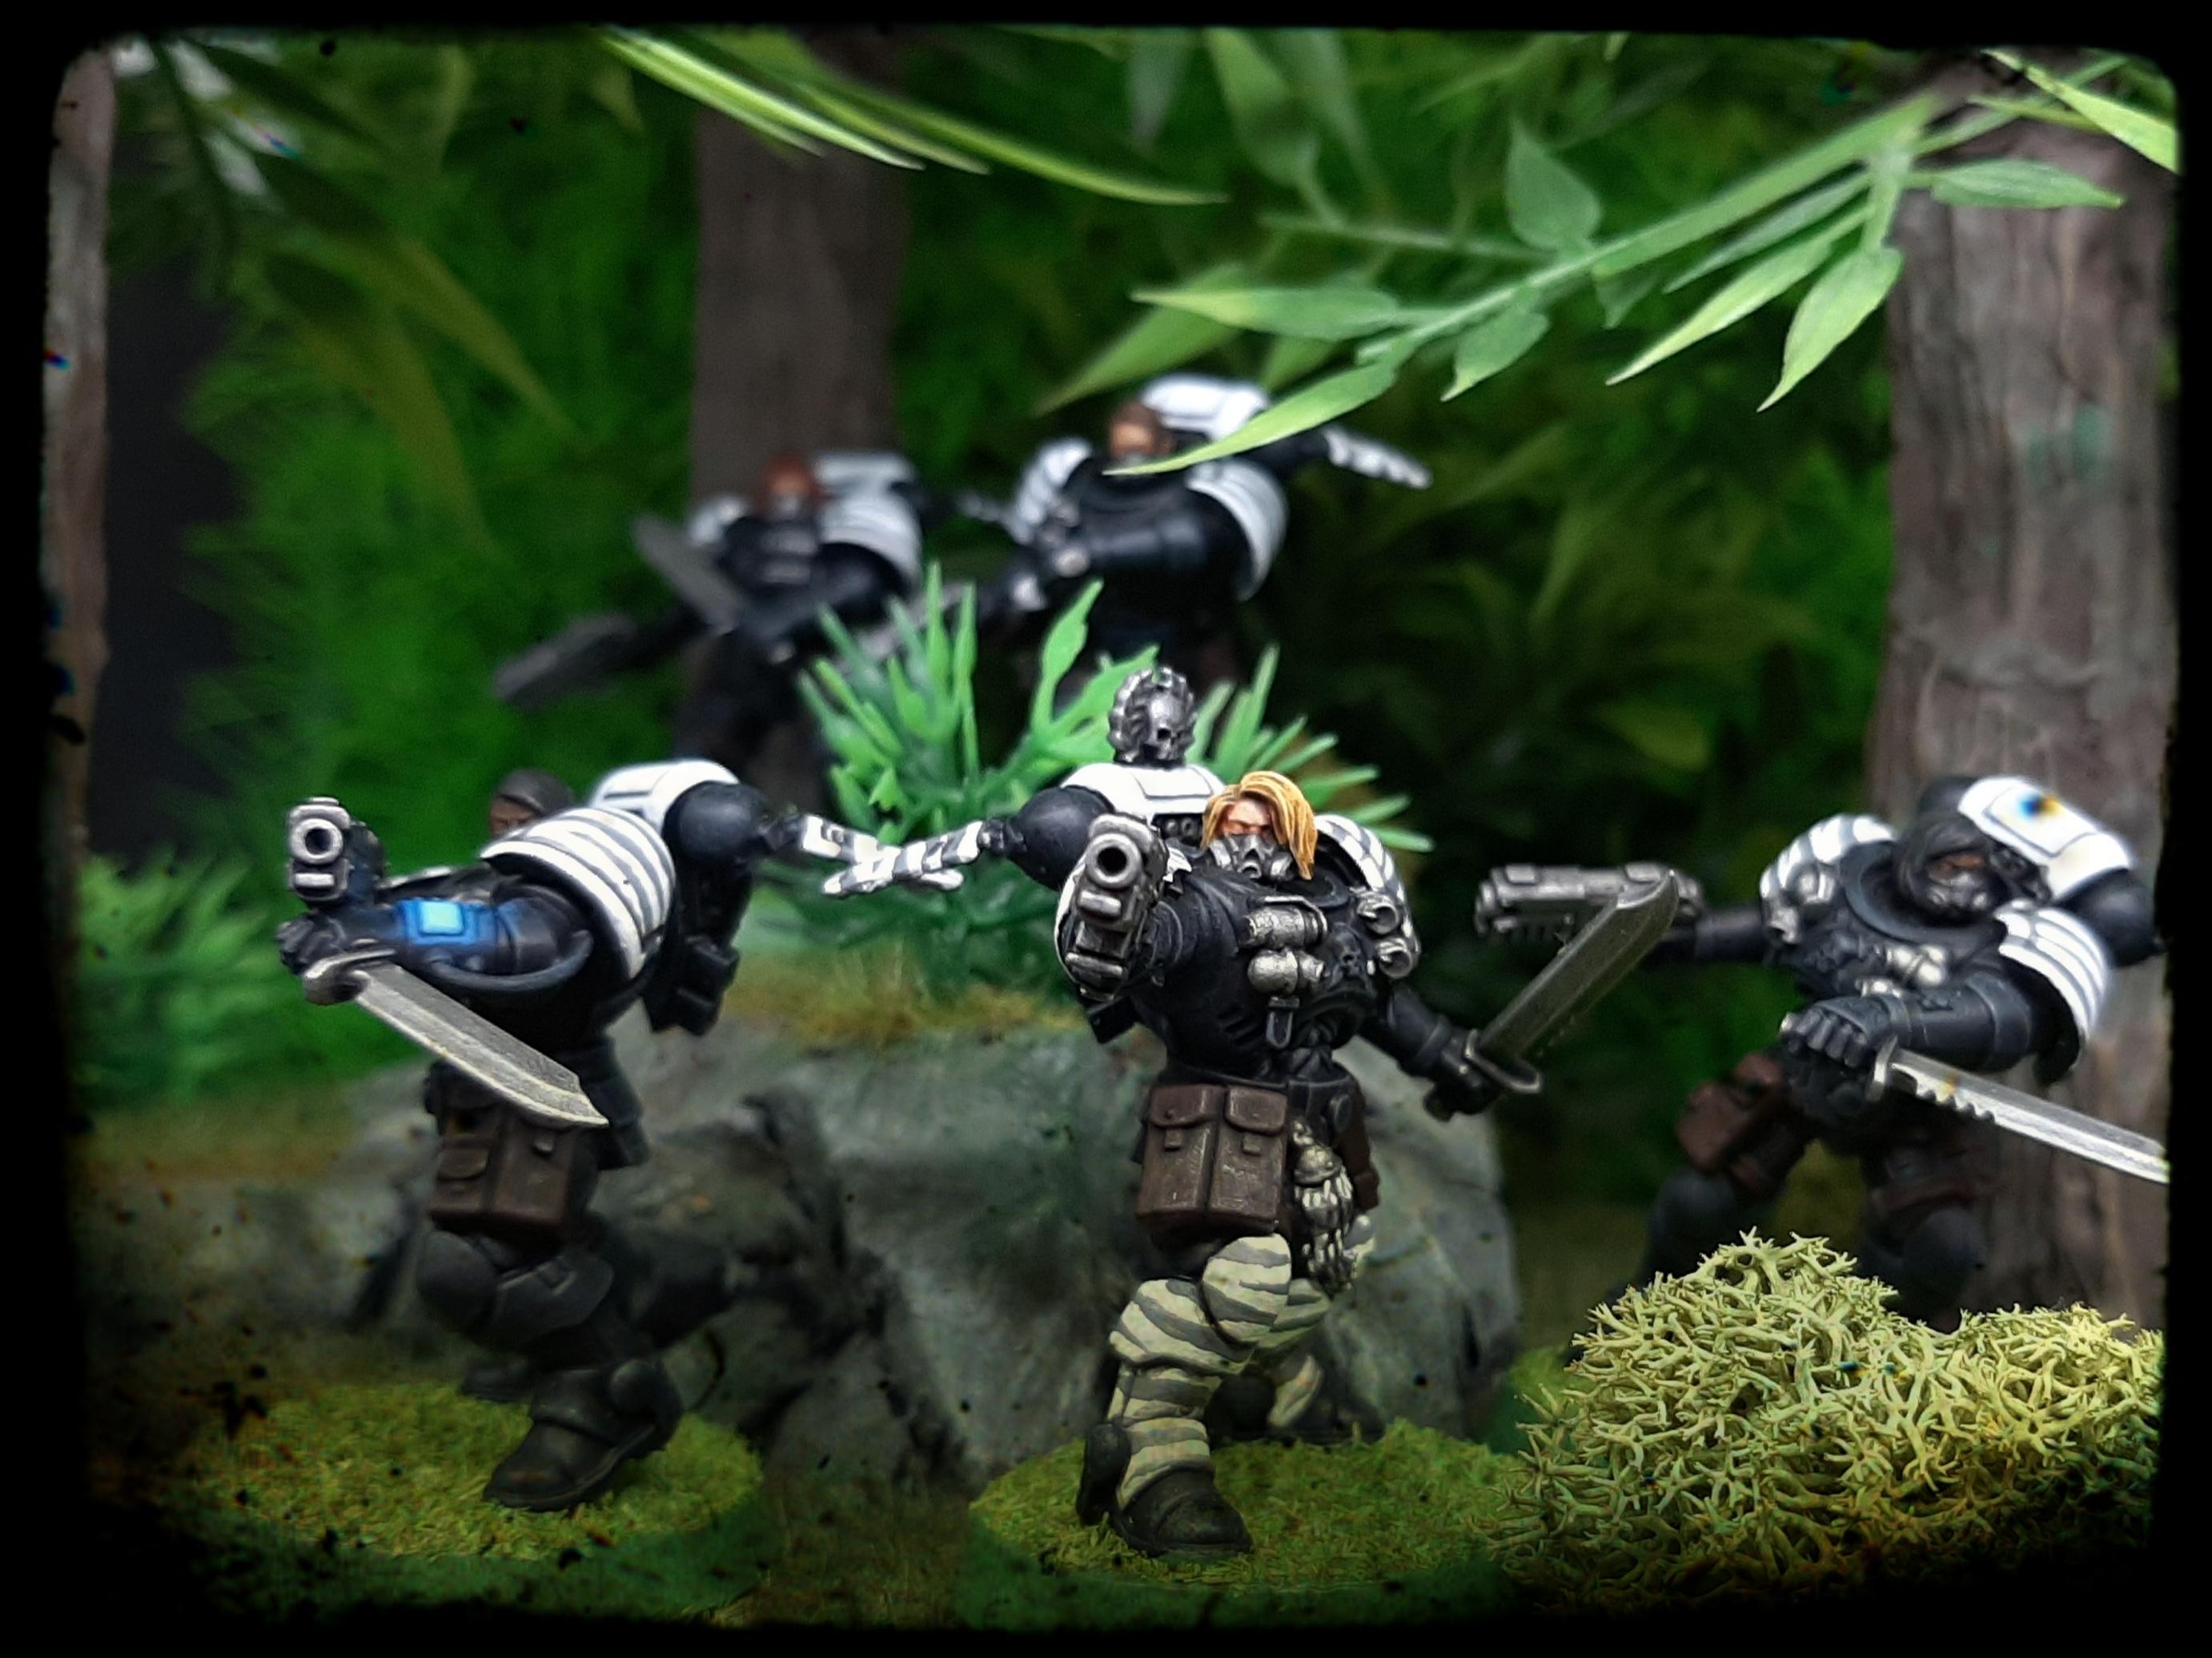 Assault, Bolt, Camouflage, Chute, Close, Combat, Female, Fighting, Forest, Grav, Grenades, Hair, India, Jungle, Kali, Knife, Knives, New, Pistol, Reivers, Scouts, Space Marines, Stripes, Tigers, Tigress, Tigresses, Veda, Warhammer 40,000, White